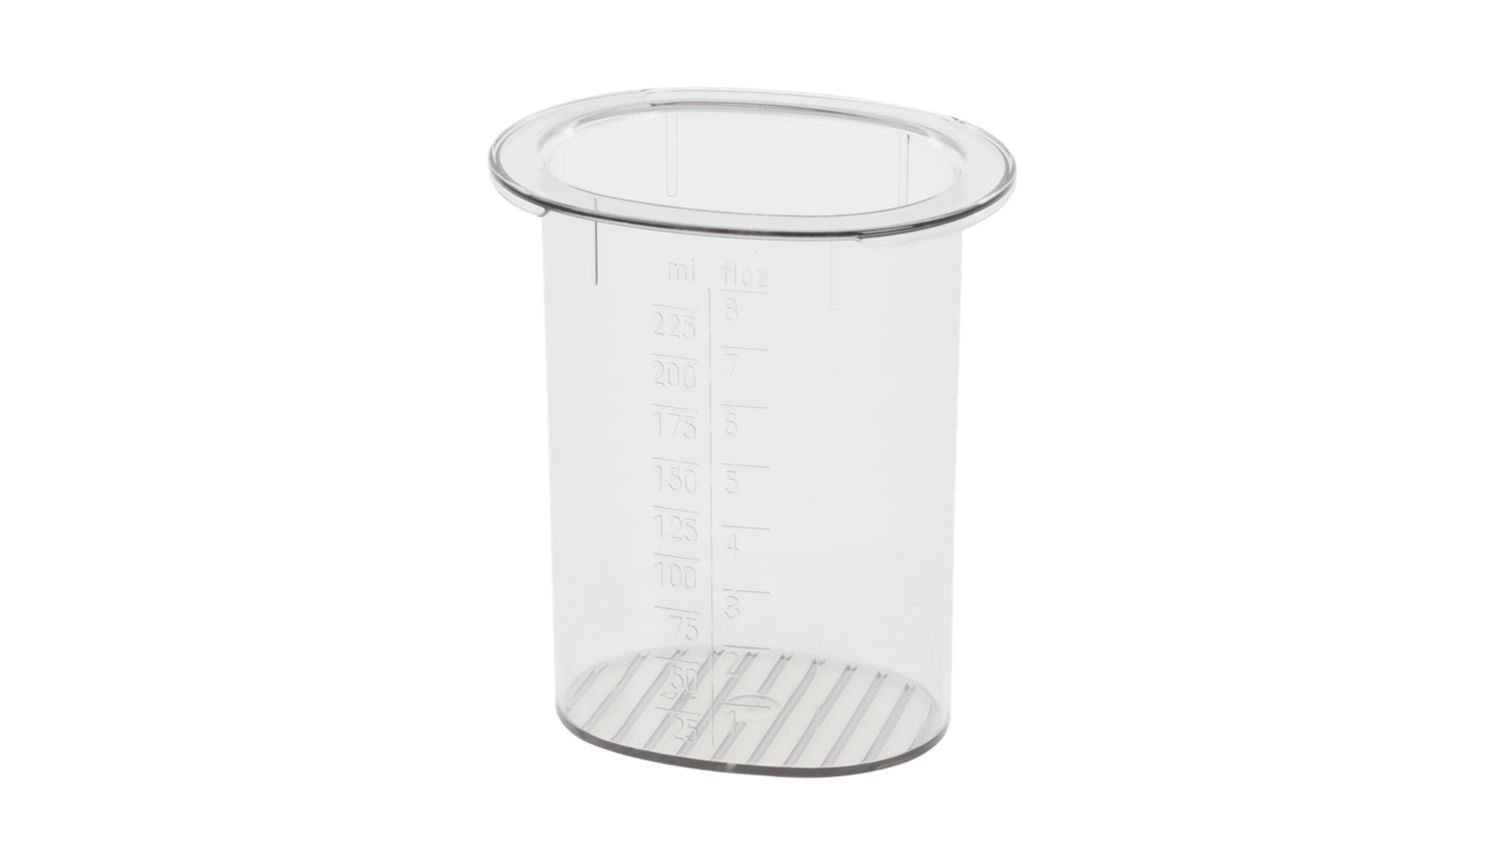 Food Pusher, including Measuring Cup for Bosch Siemens Food Processors - 00635479 BSH